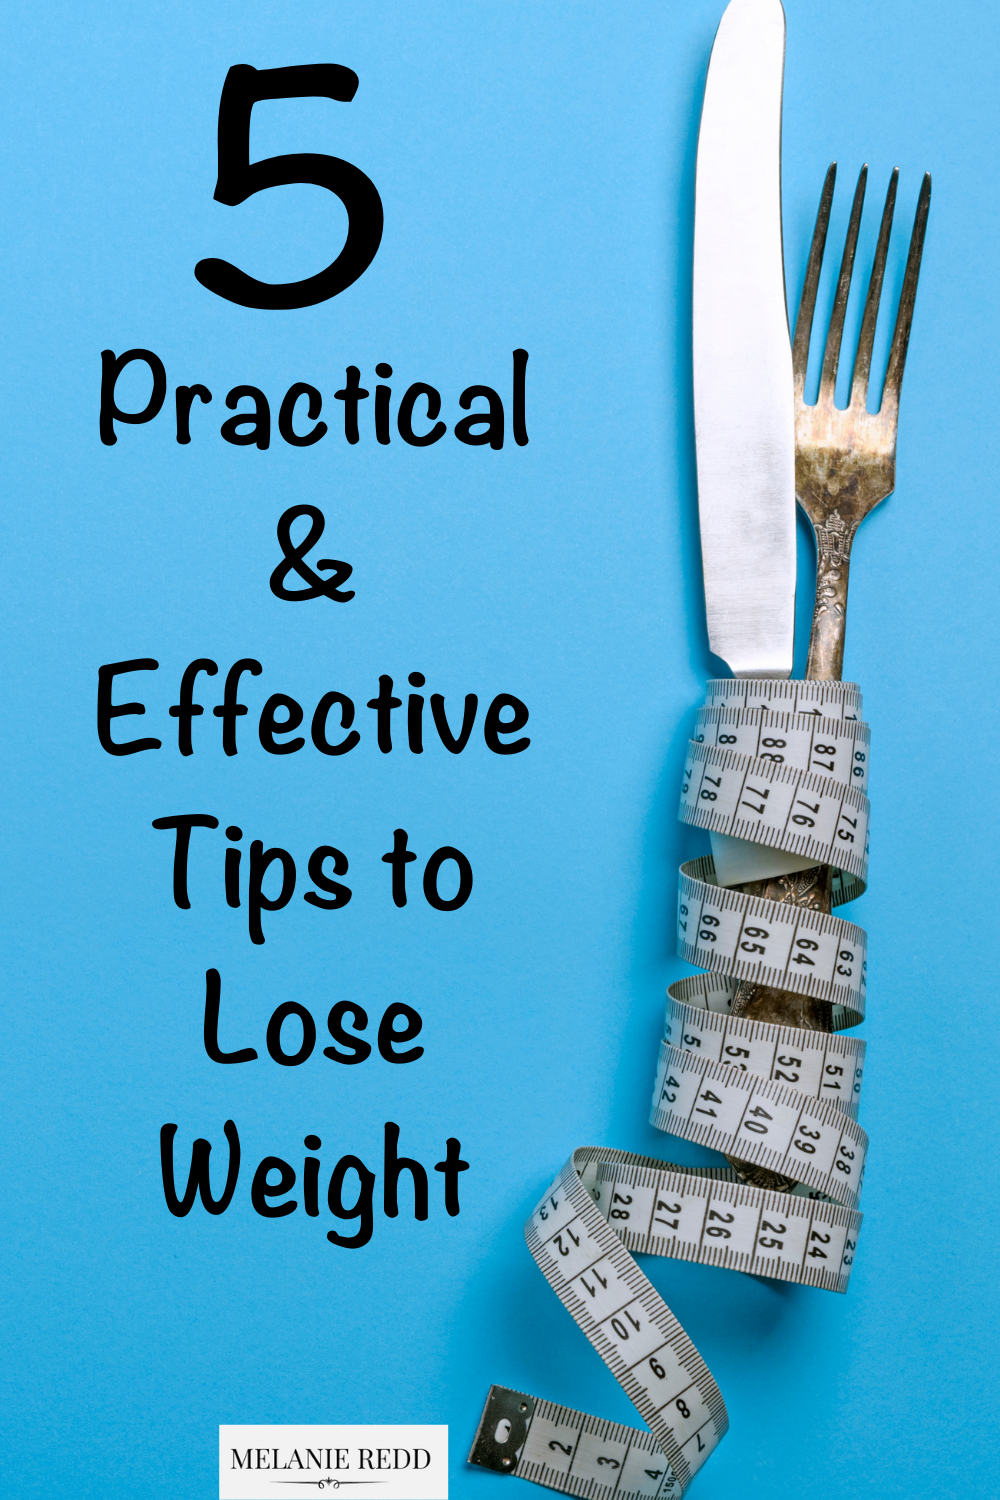 Recently, we had to make some life-altering decisions about our health and our future. Would we continue on our current health trajectory or would we make some big changes? We chose the changes! Here are 5 practical & effective tips to lose weight. #healthyliving #healthtransformation #loseweight #betterhealth